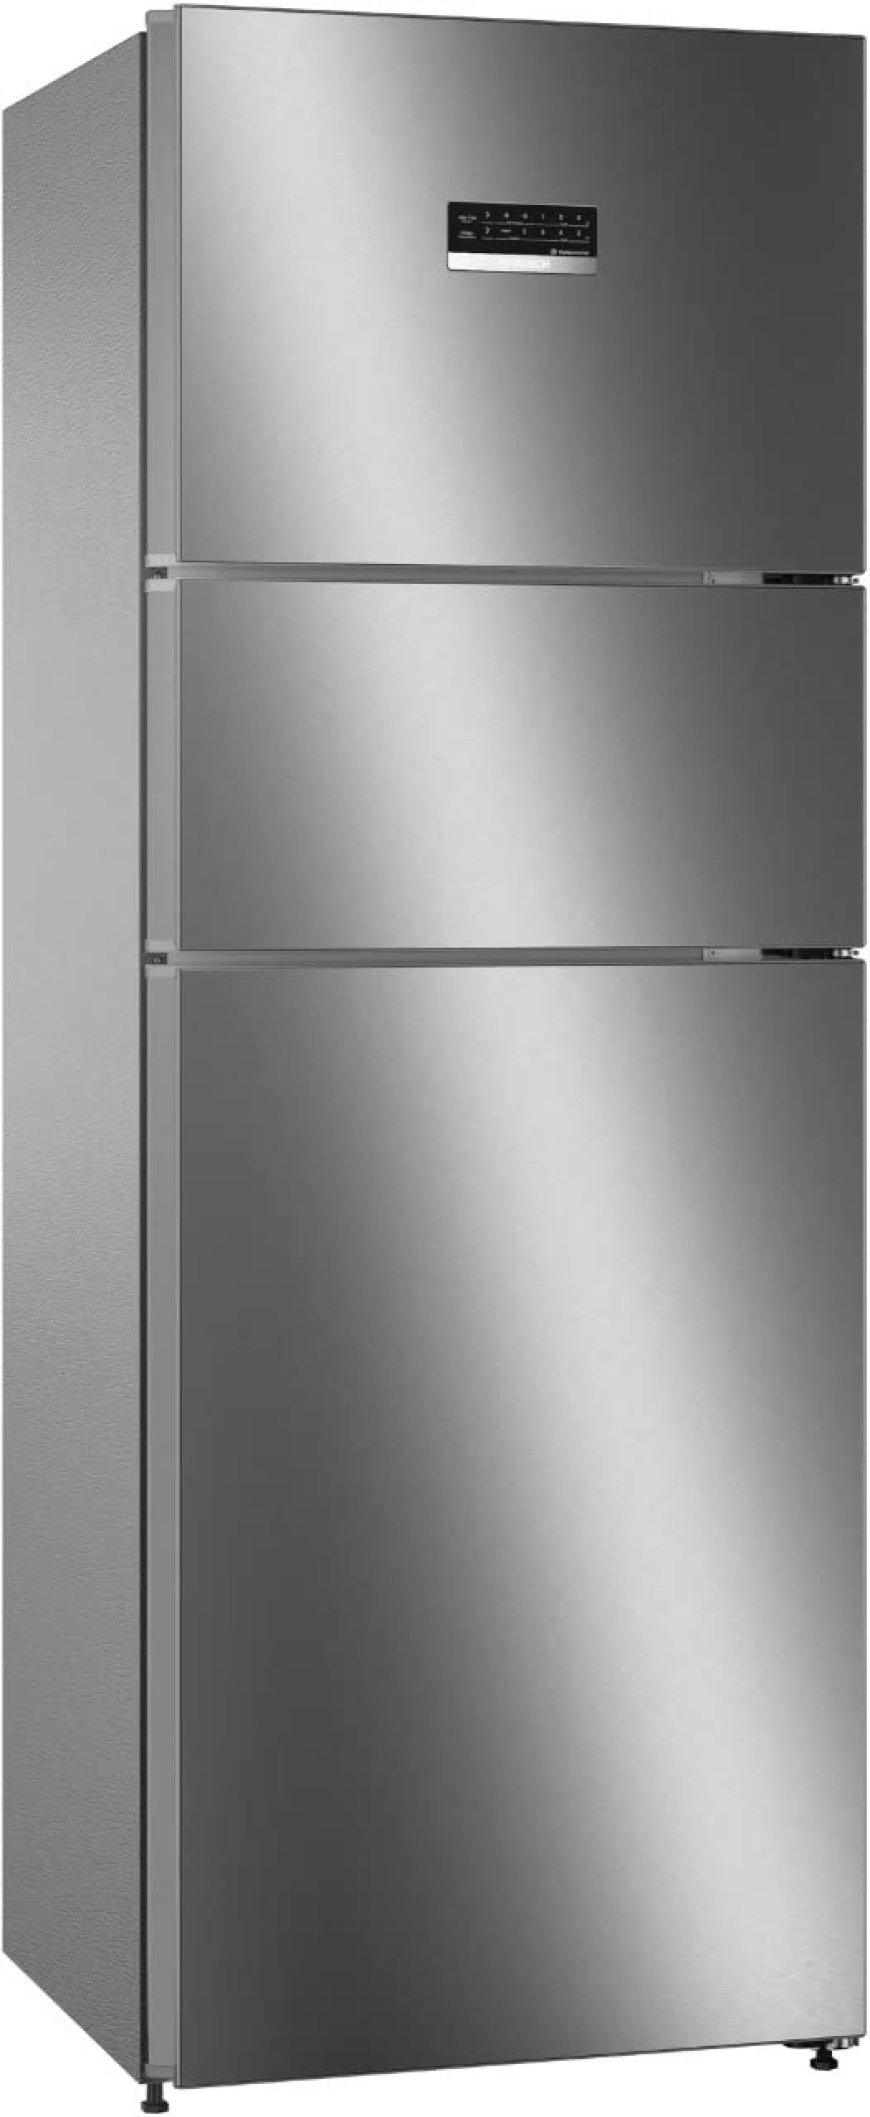 BOSCH 335 L 3 Star Frost Free Triple Door Convertible Refrigerator At just Rs. 40,590 [MRP 68,790]